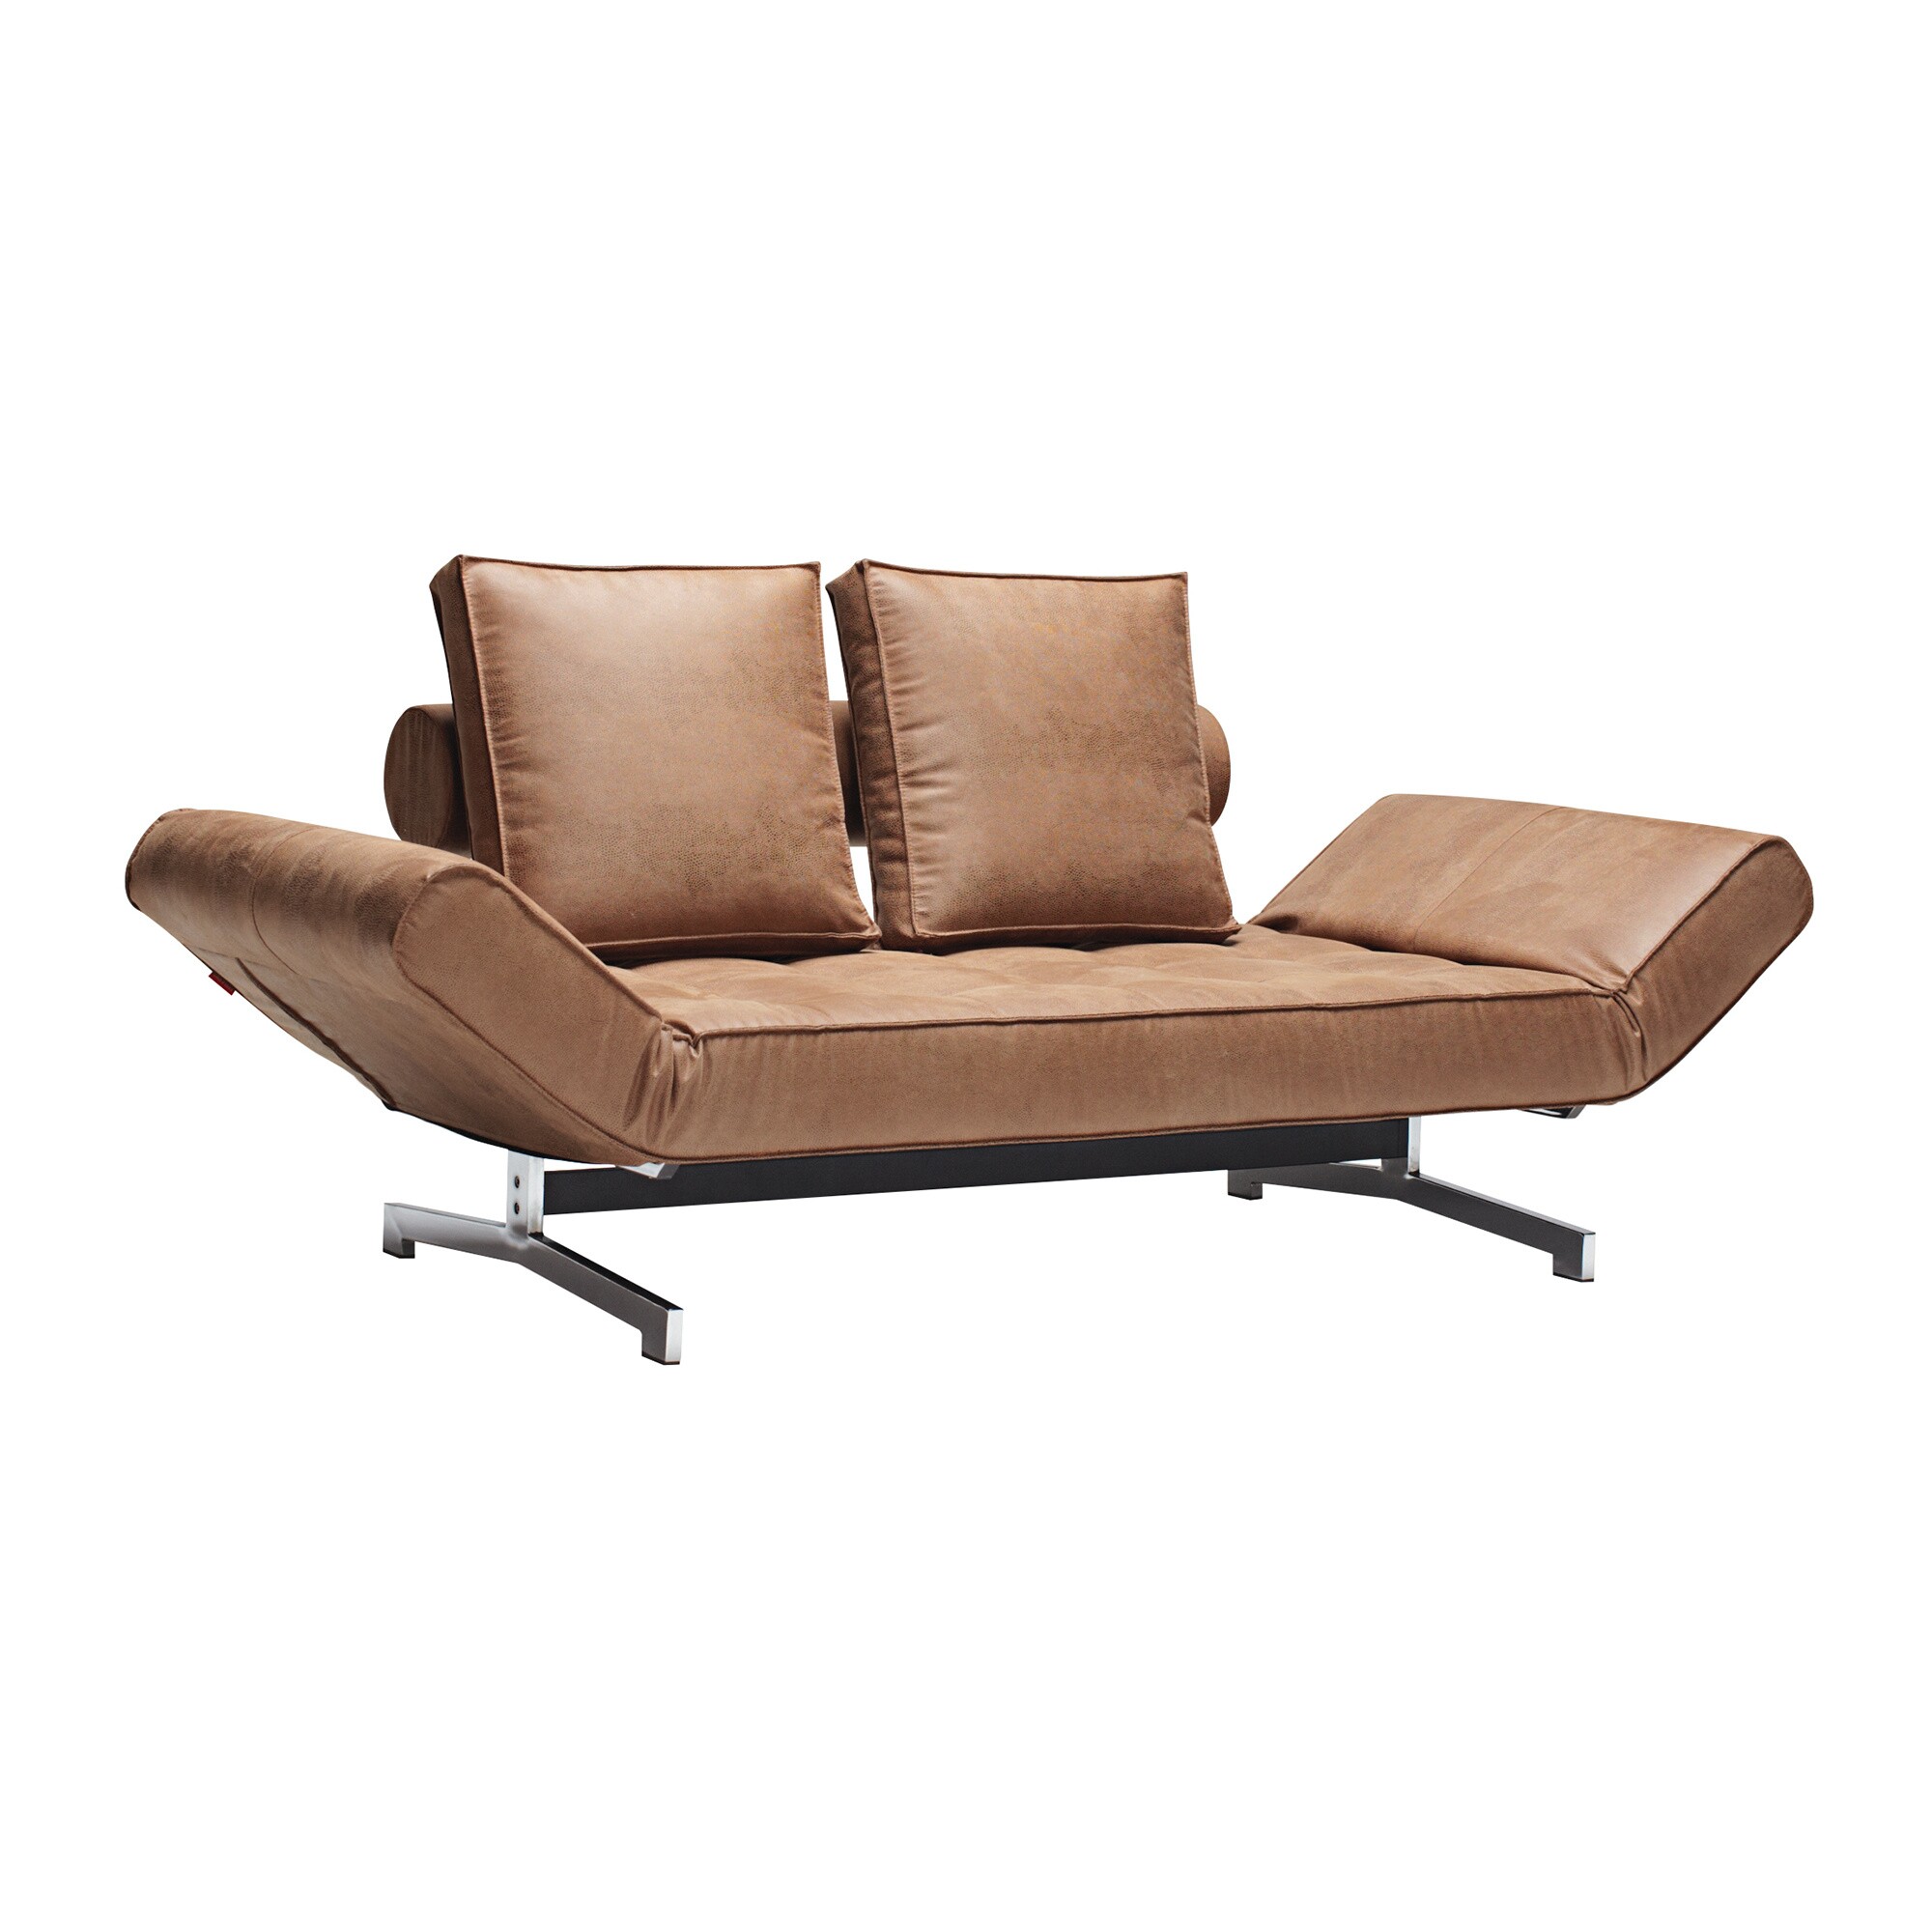 Innovation Ghia Sofa Bed Fabric With Leather Legs Chromed Steel Ambientedirect